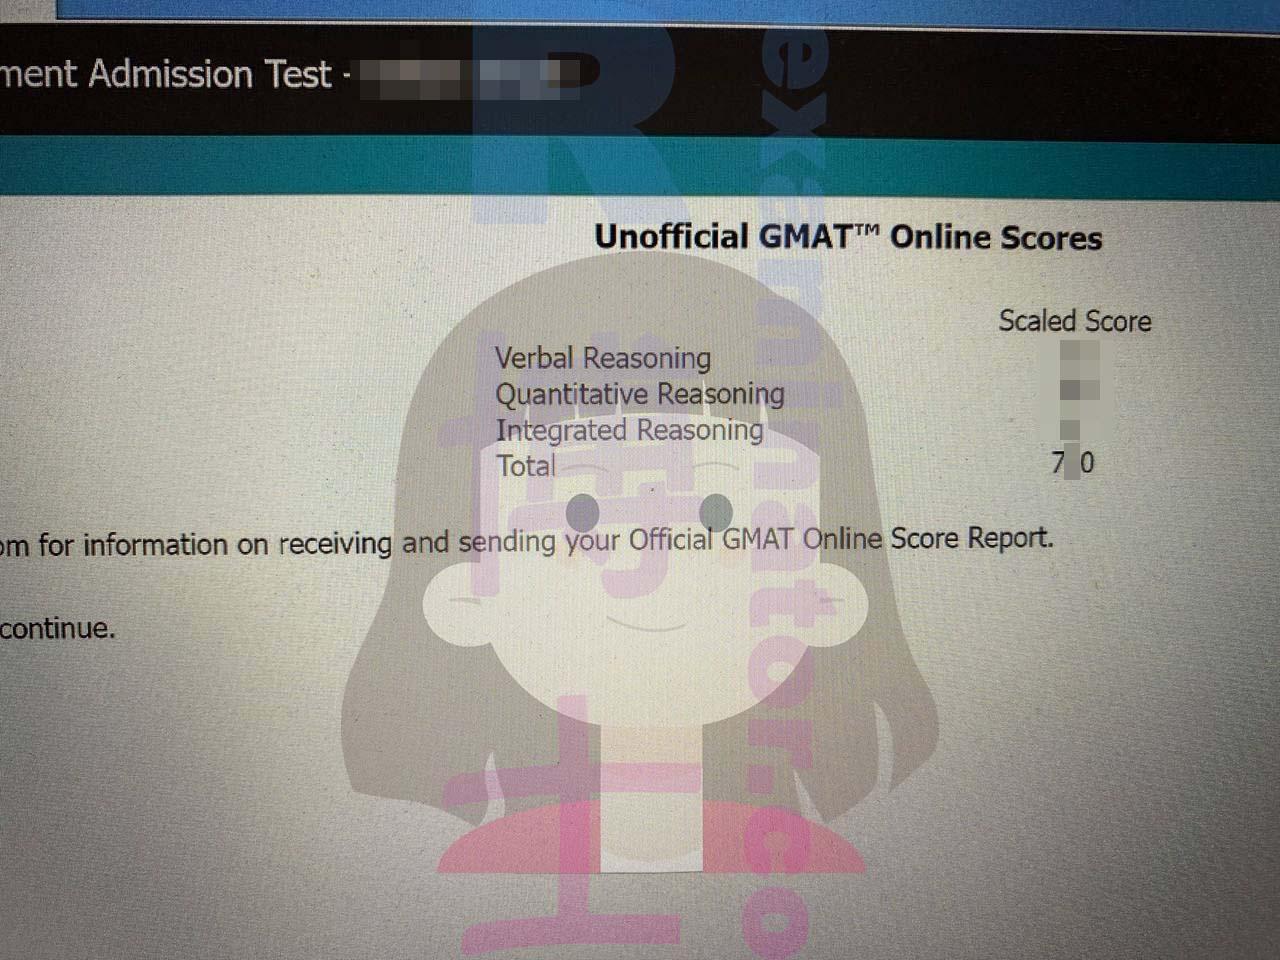 score image for GMAT Cheating success story #499